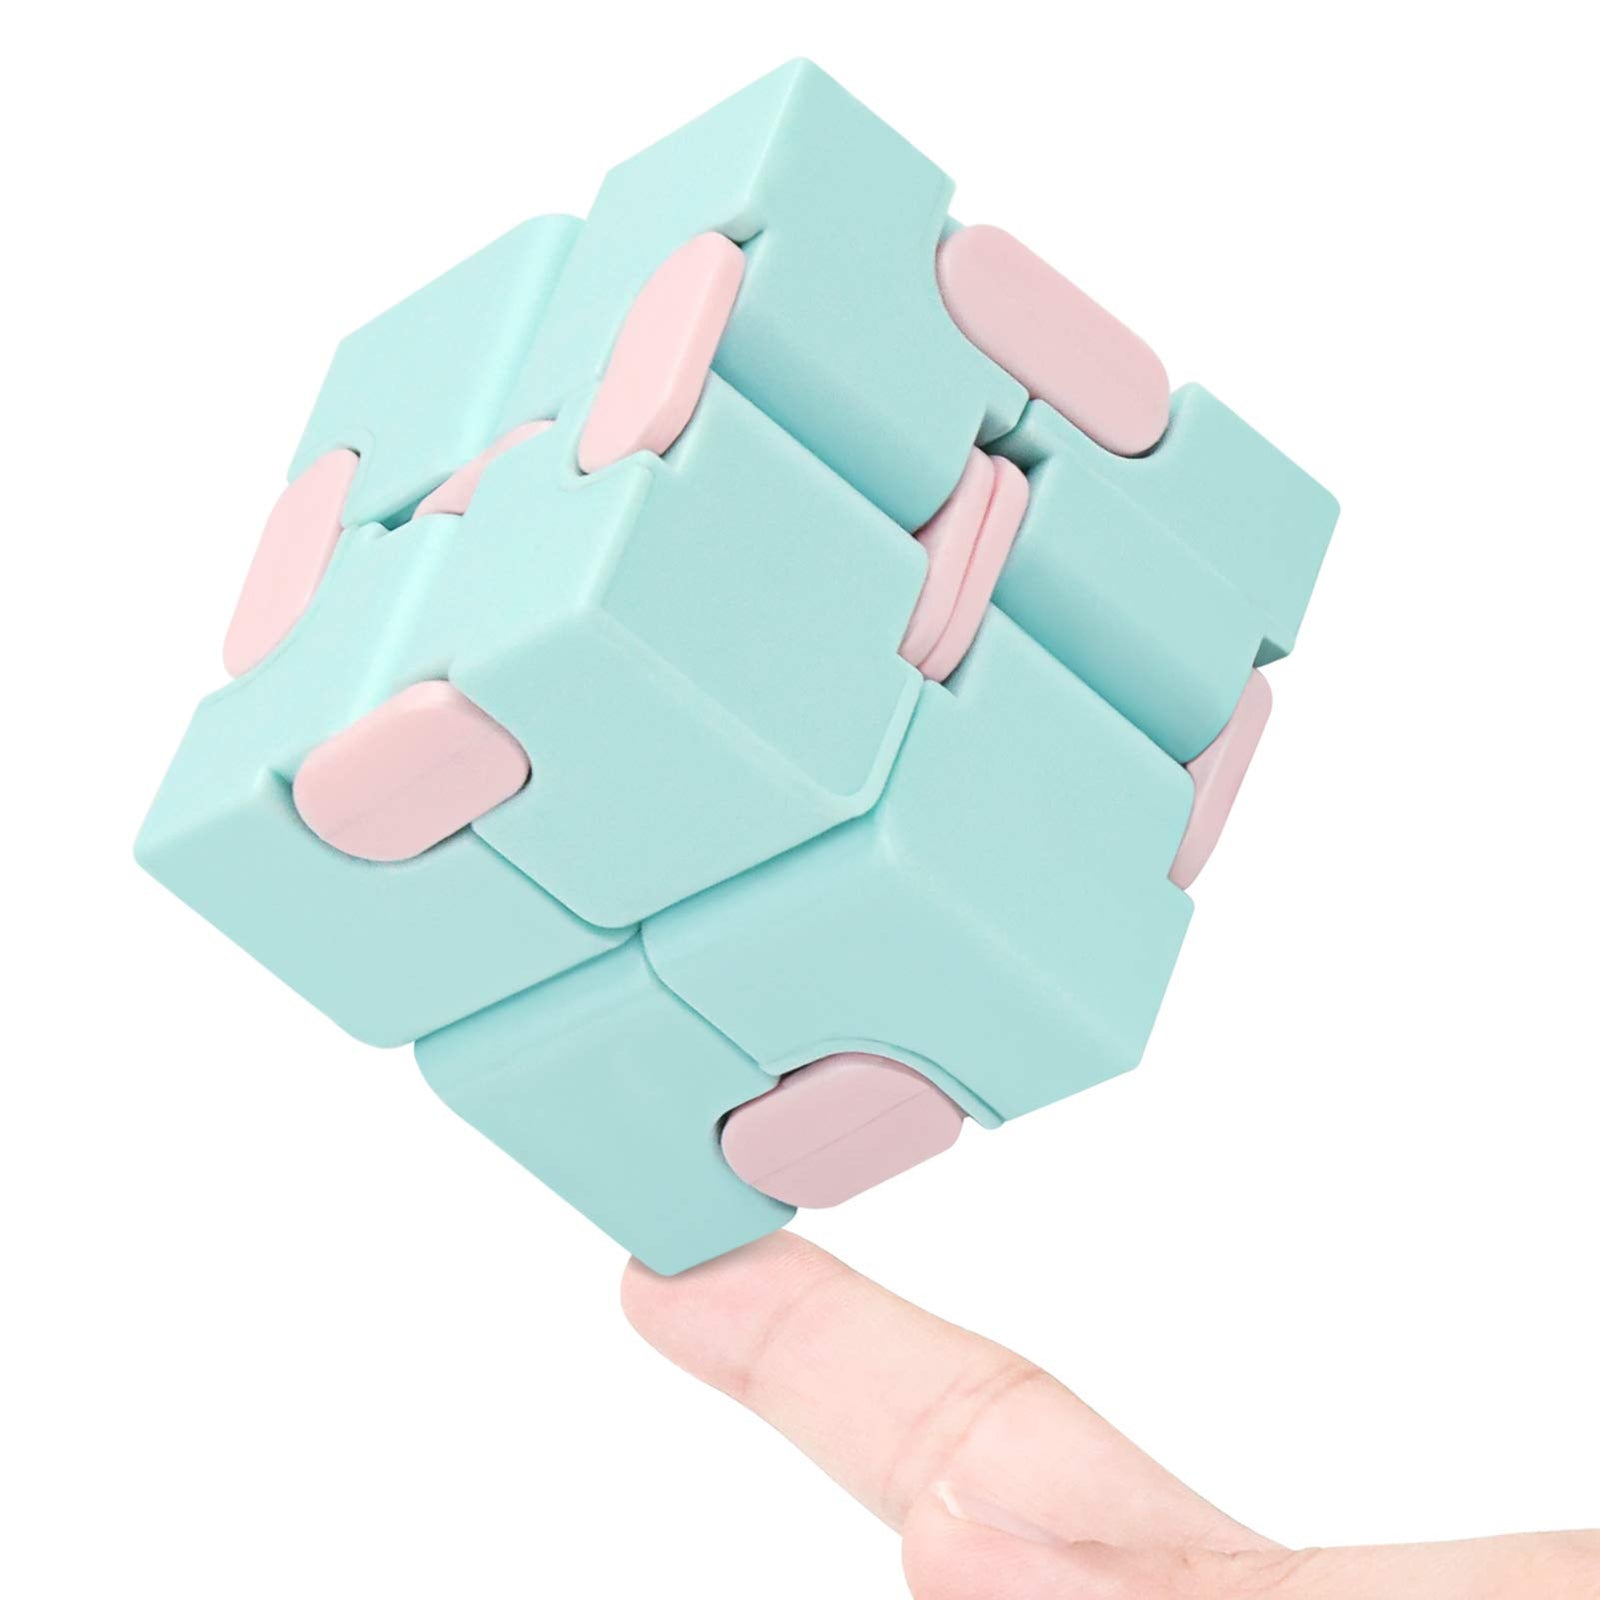 WUQID Infinity Cube Fidget Toy Stress Relieving Fidgeting Game for Kids and Adults,Cute Mini Unique Gadget for Anxiety Relief and Kill Time (Macaron Blue)